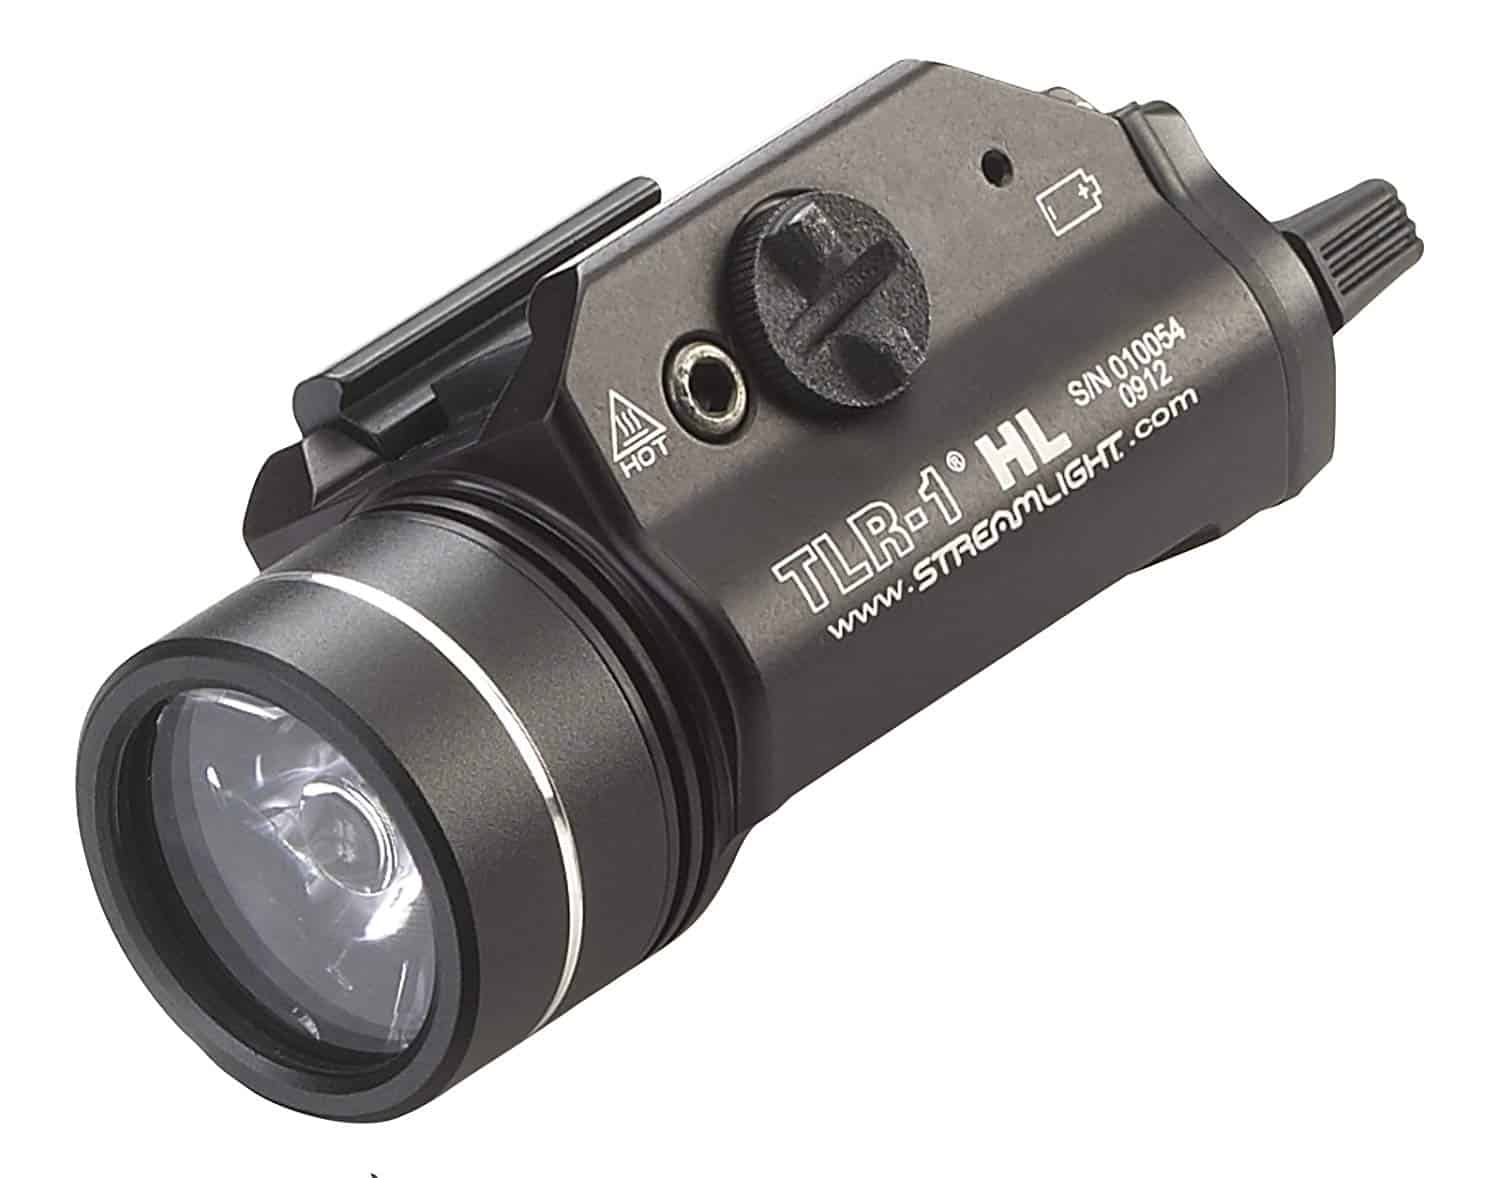 Streamlight 692602 69260 TLR-1 HL Weapon Mount Tactical Flashlight Light 800 Lumens with Strobe